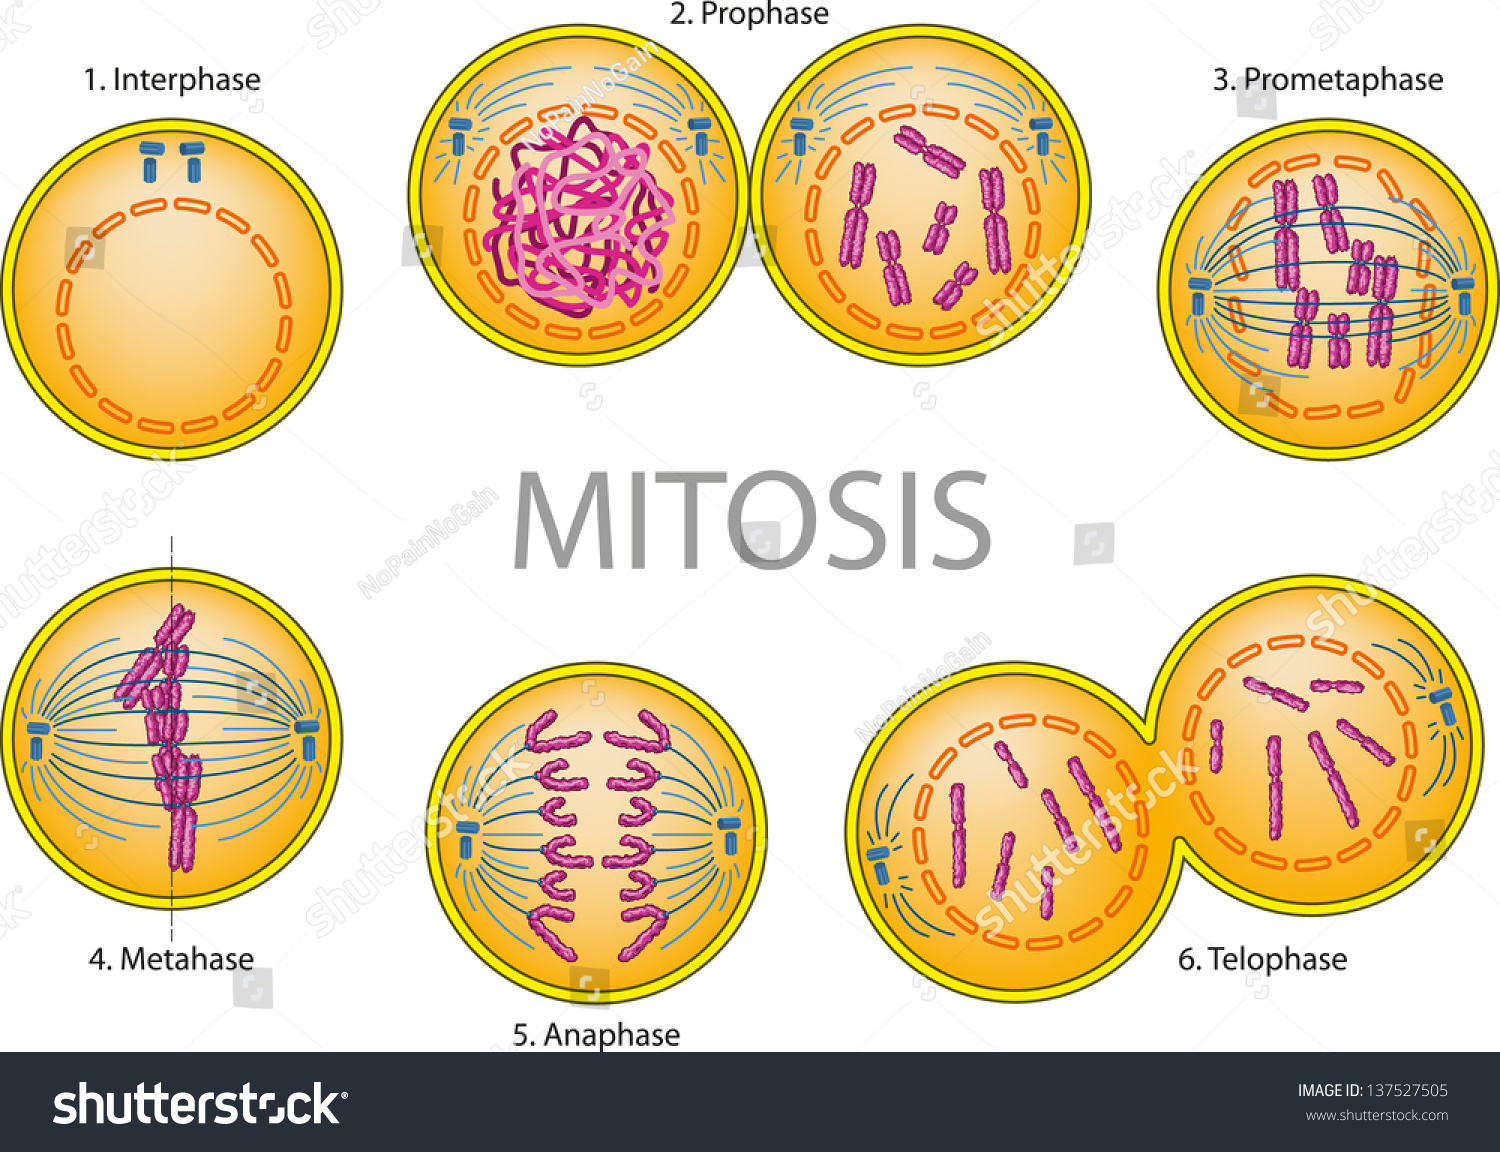 Cell Division Mitosis Stock Vector Illustration 137527505 Shutterstock 1205